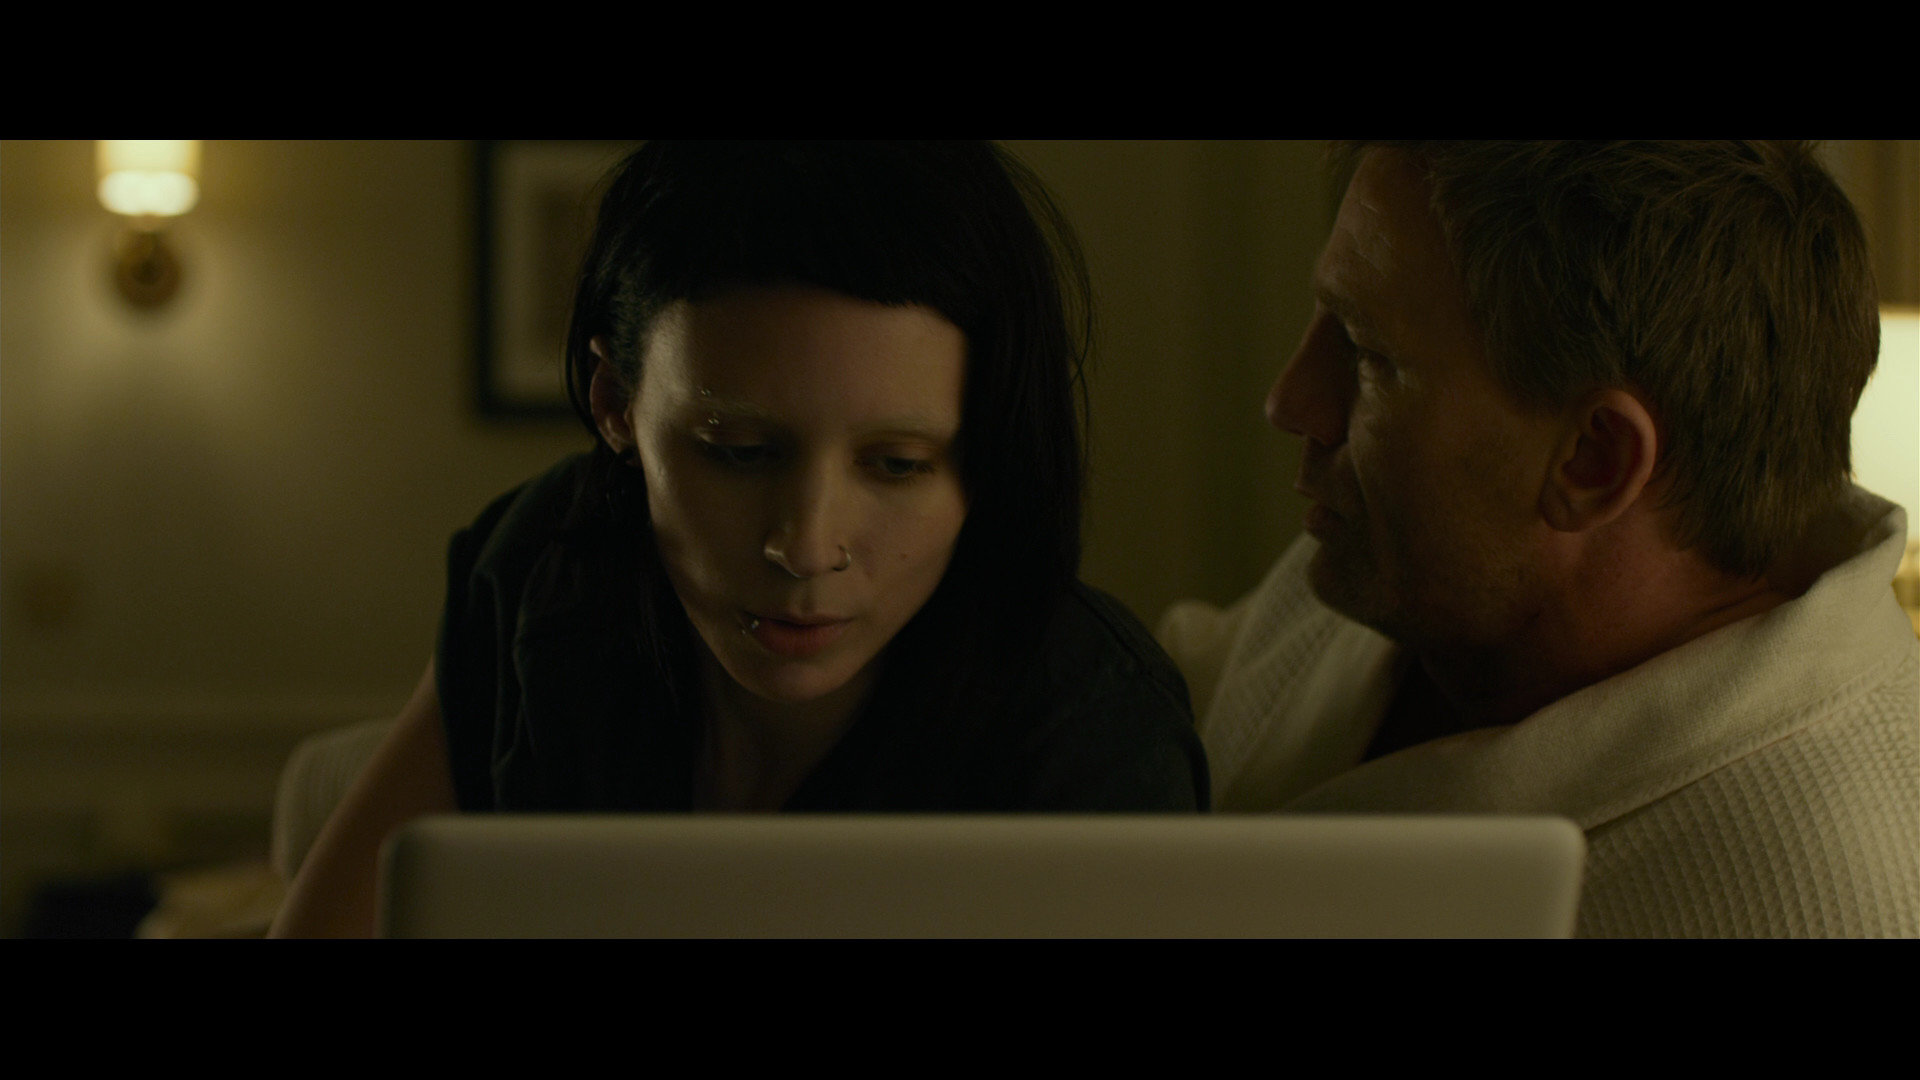 Download full hd 1920x1080 The Girl With The Dragon Tattoo PC wallpaper ID:444146 for free